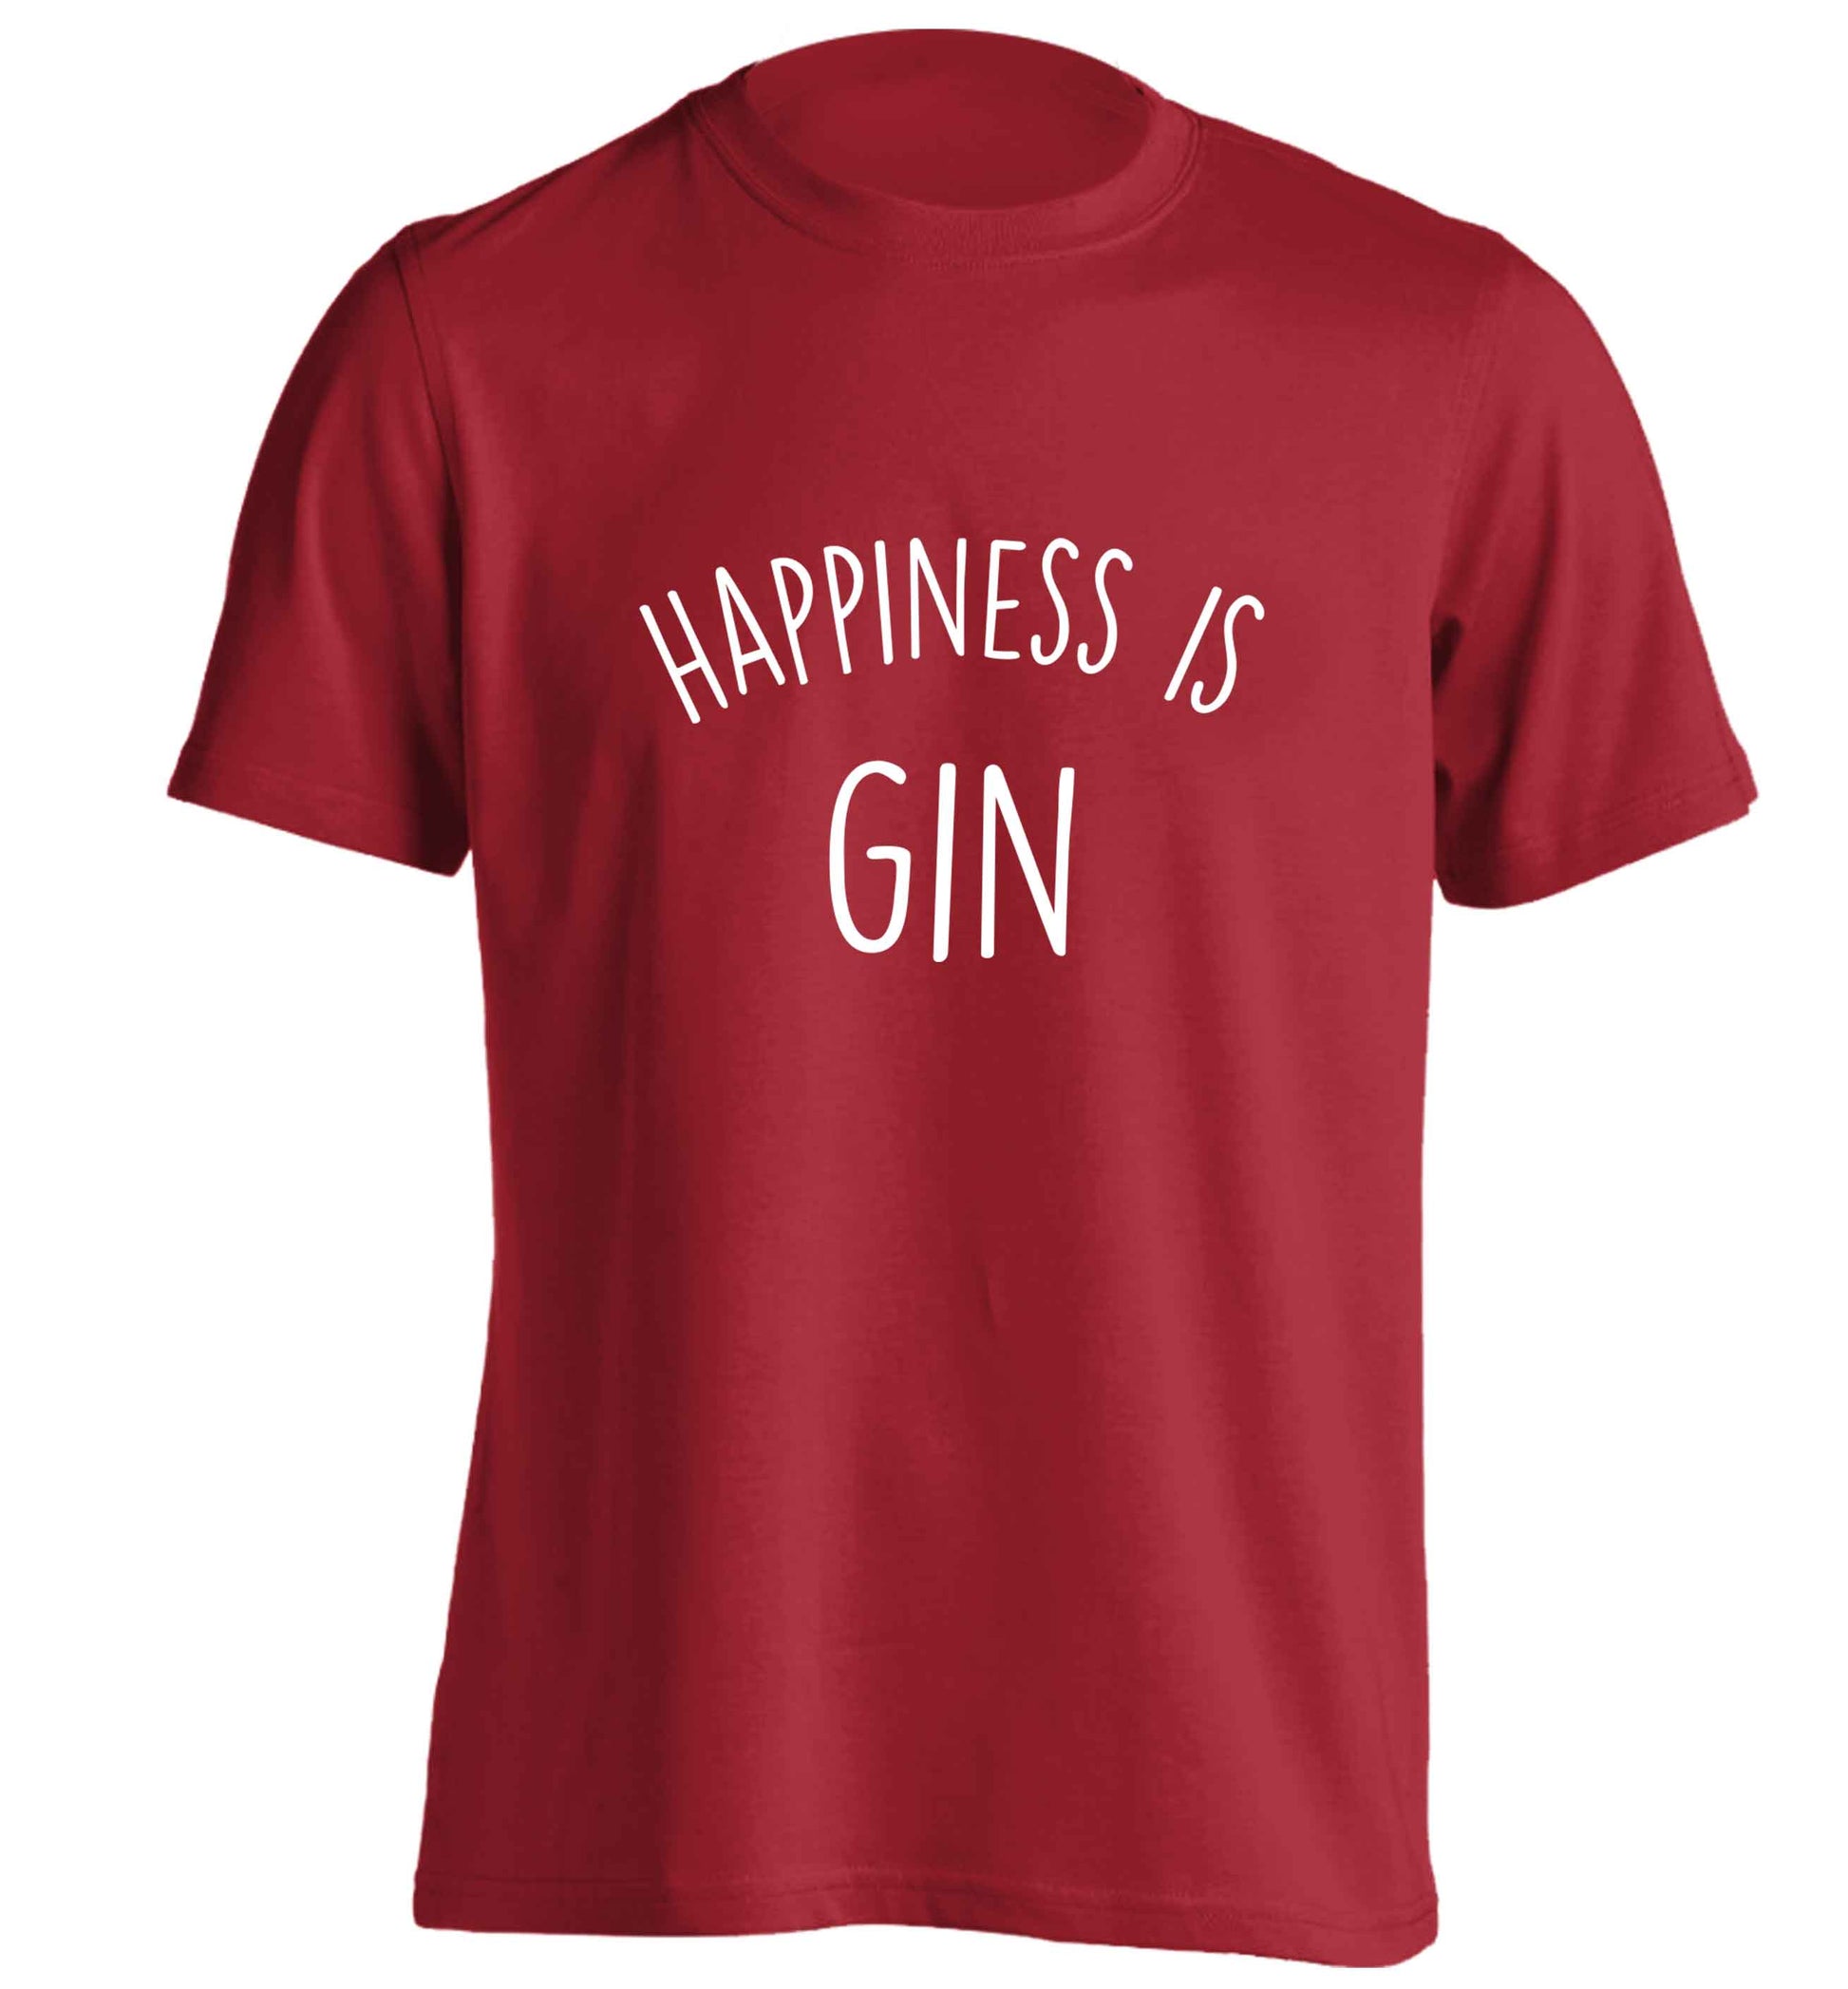 Happiness is gin adults unisex red Tshirt 2XL